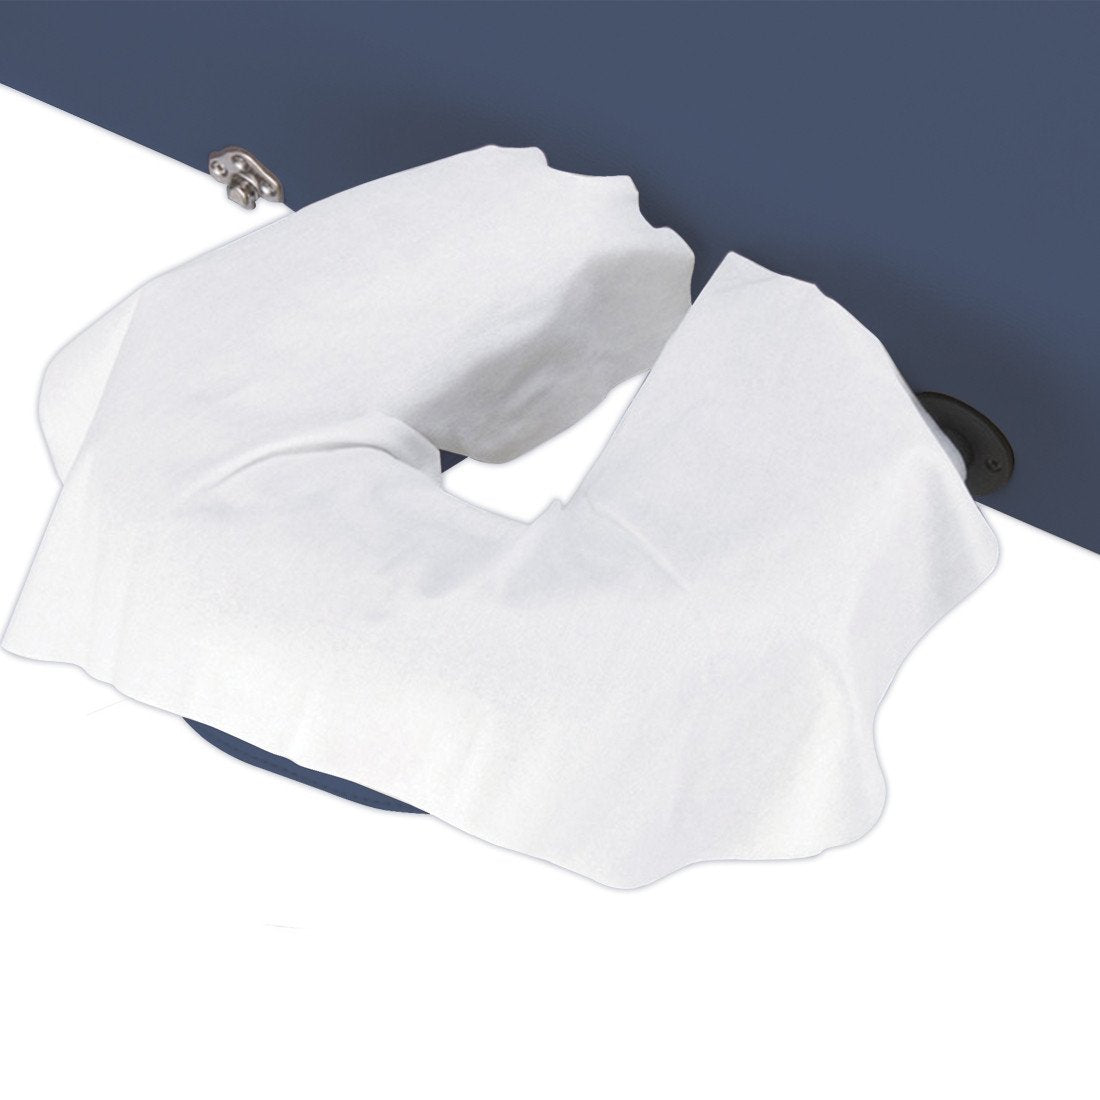 Disposable Face Pillow Covers - 100 Pack